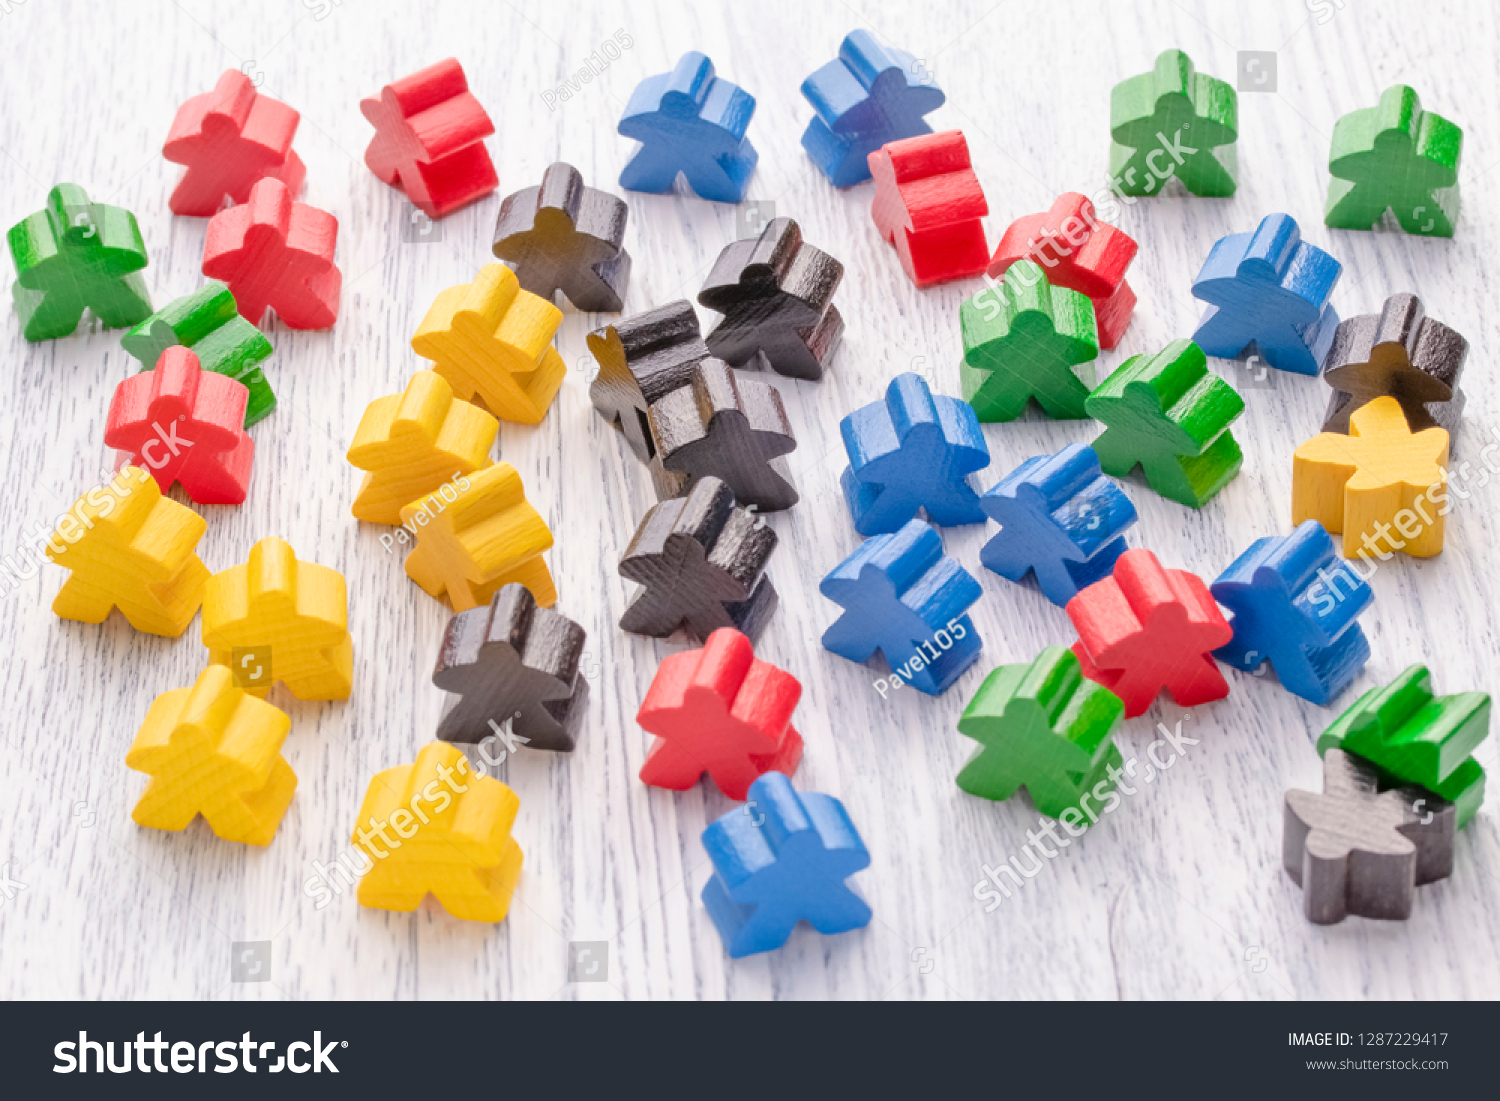 Multicolored wooden figures in the form of stars. Parts of the board game. Leadership skills. The development of logic. Number one, winner and loser. Back and front background in blur. #1287229417